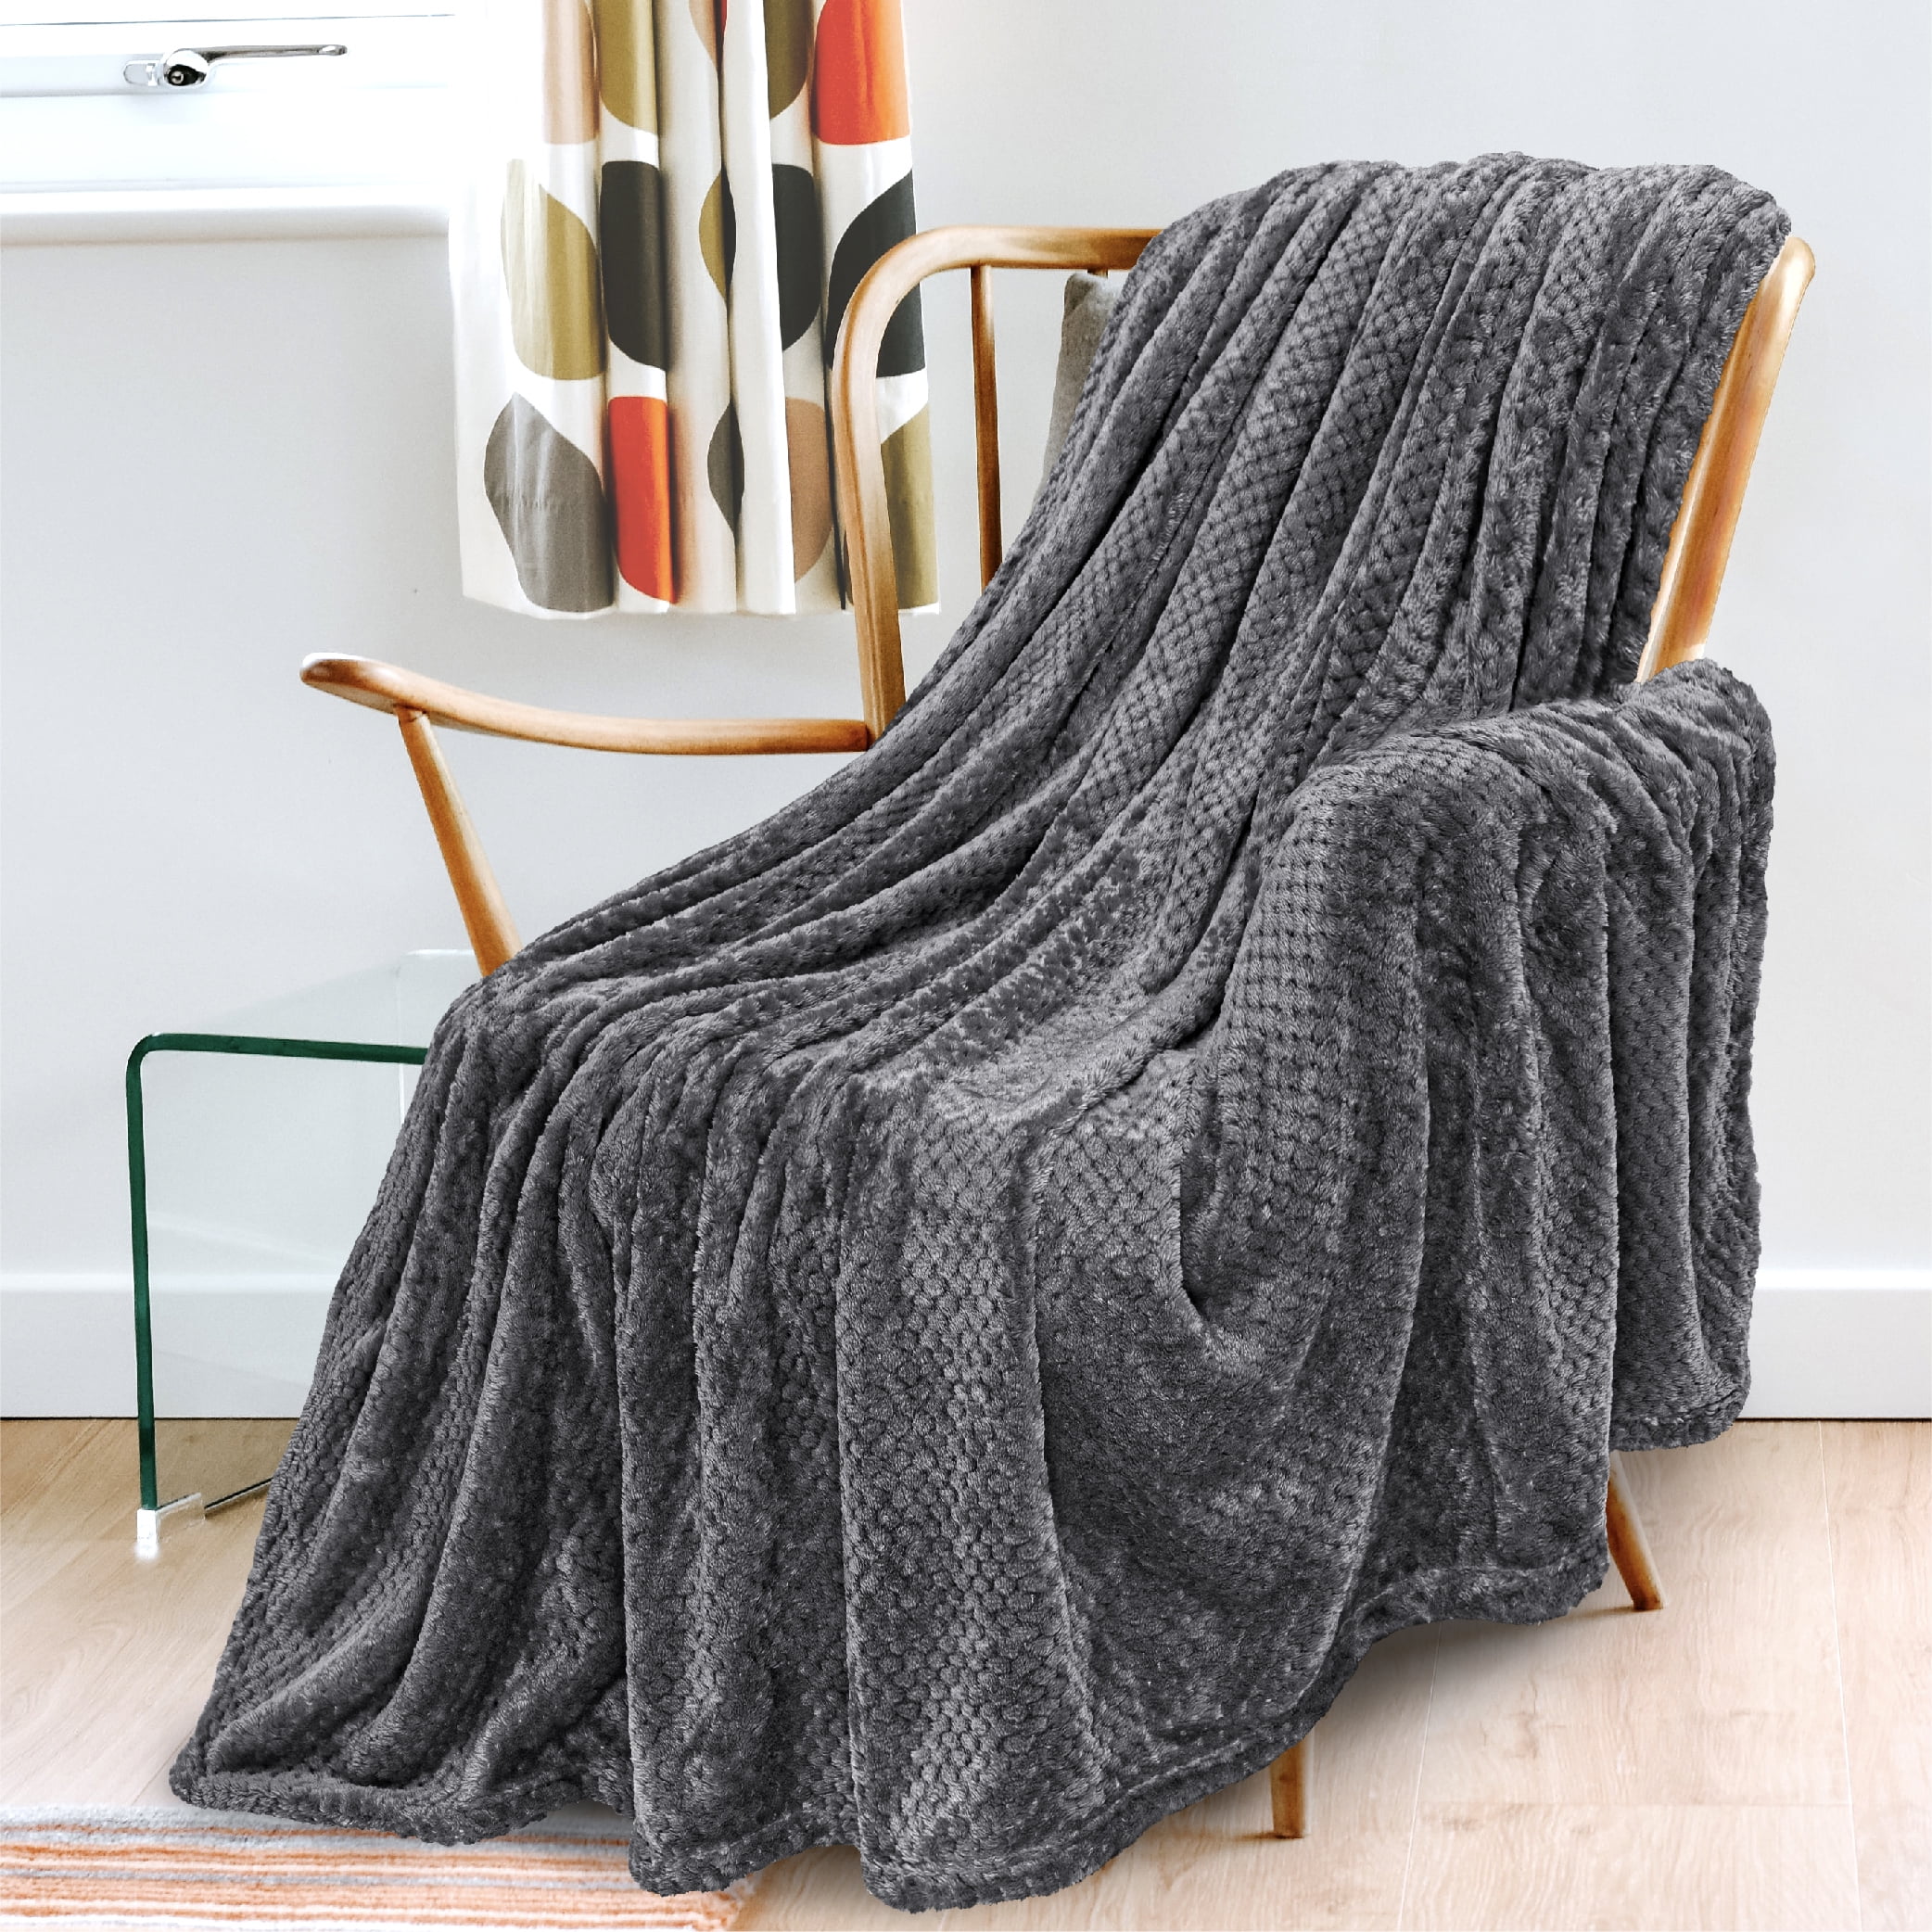 PAVILIA Waffle Fleece Throw Blanket for Couch Bed Dark Gray, Super